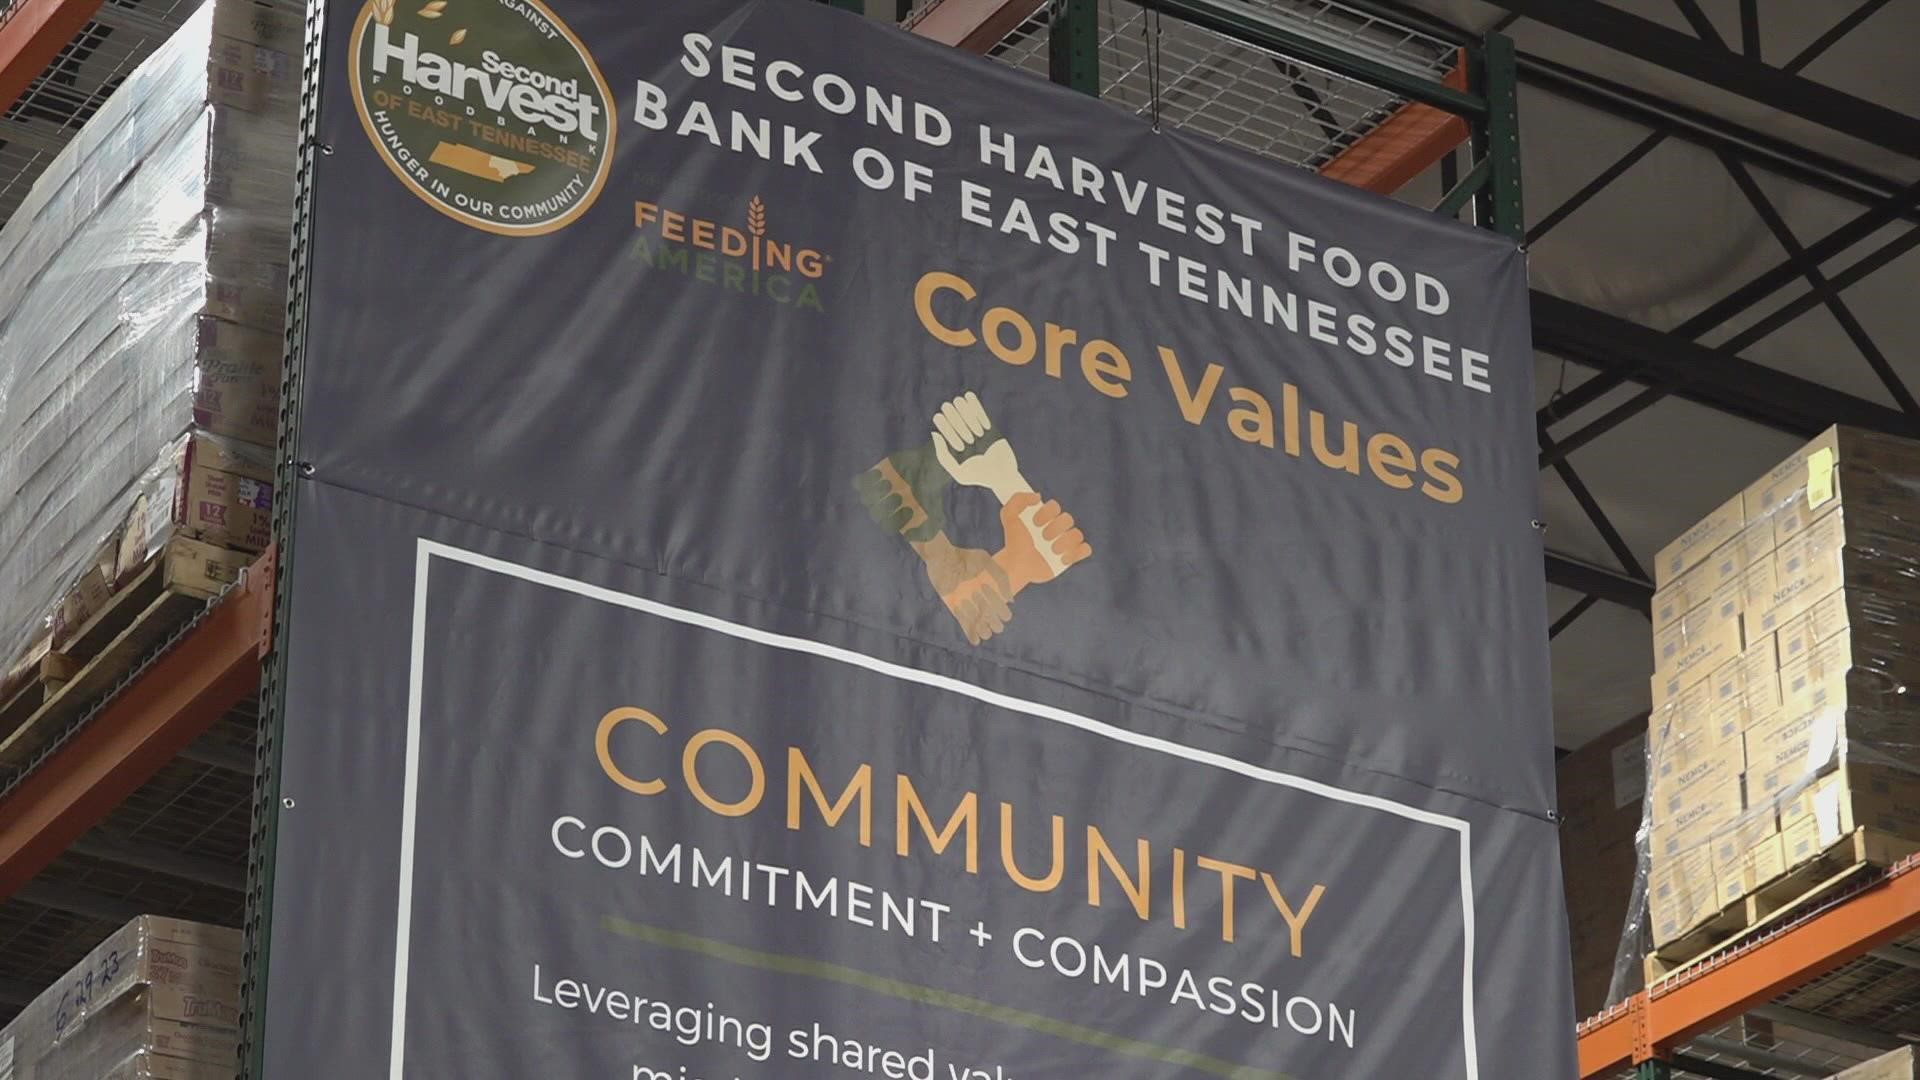 Second Harvest is stopping by different locations across East Tennessee to give away food.